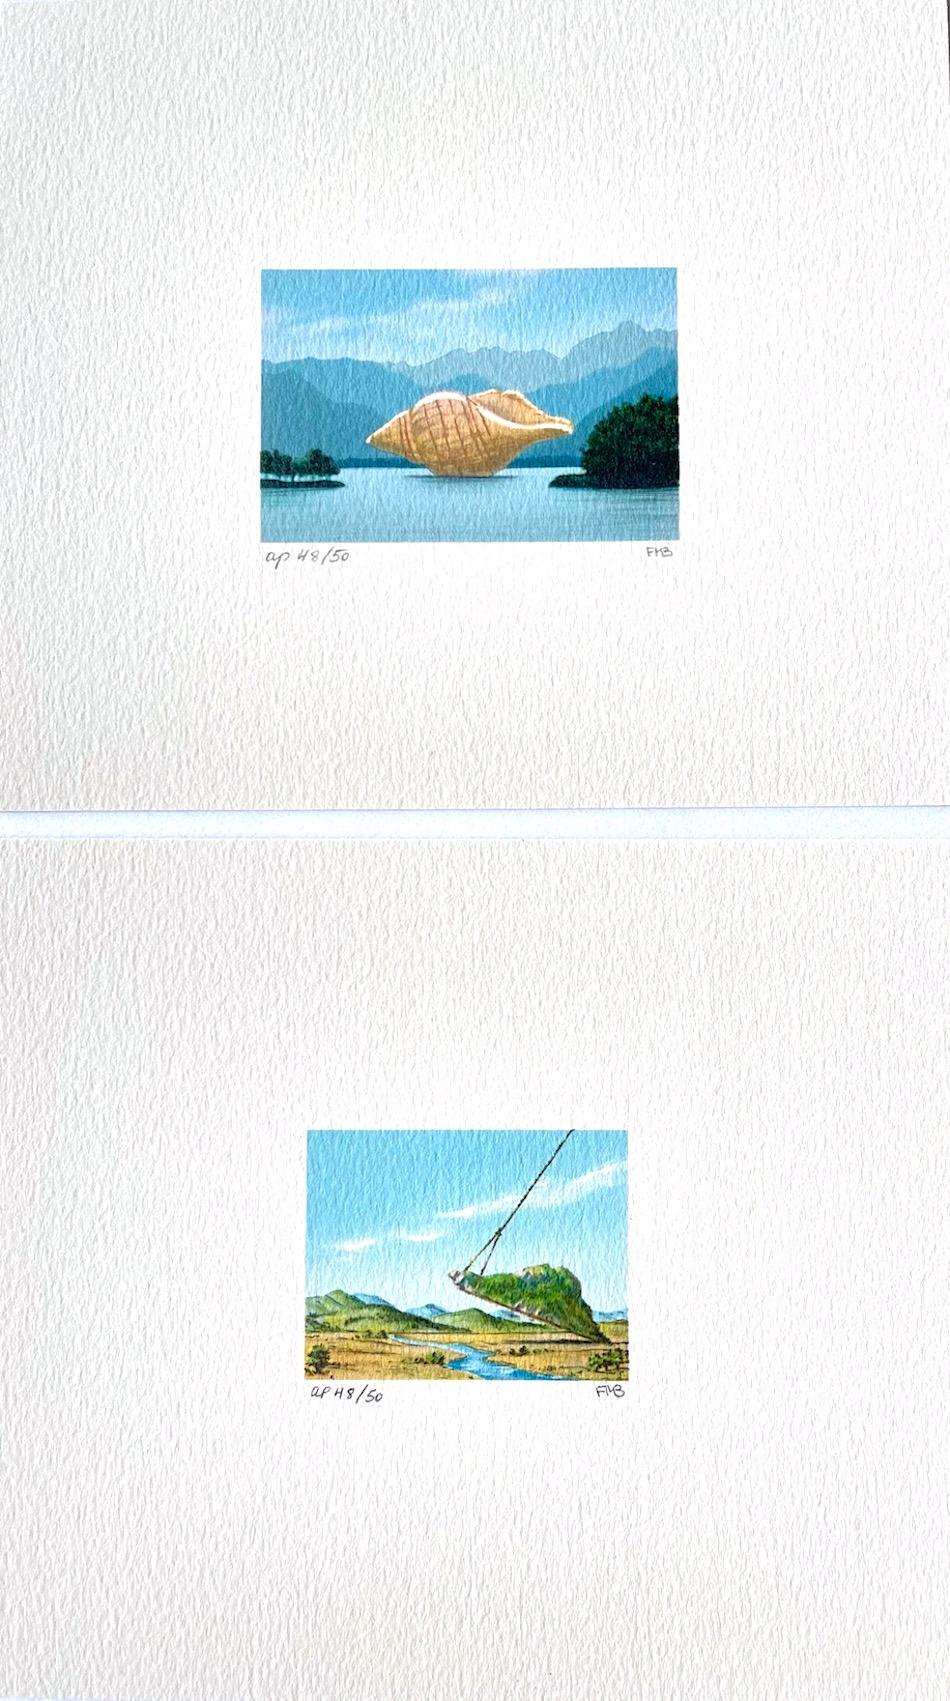 THE VISITOR and MOUNTAIN LIFT, 2 Signed Lithographs, Miniature Surreal Landscape